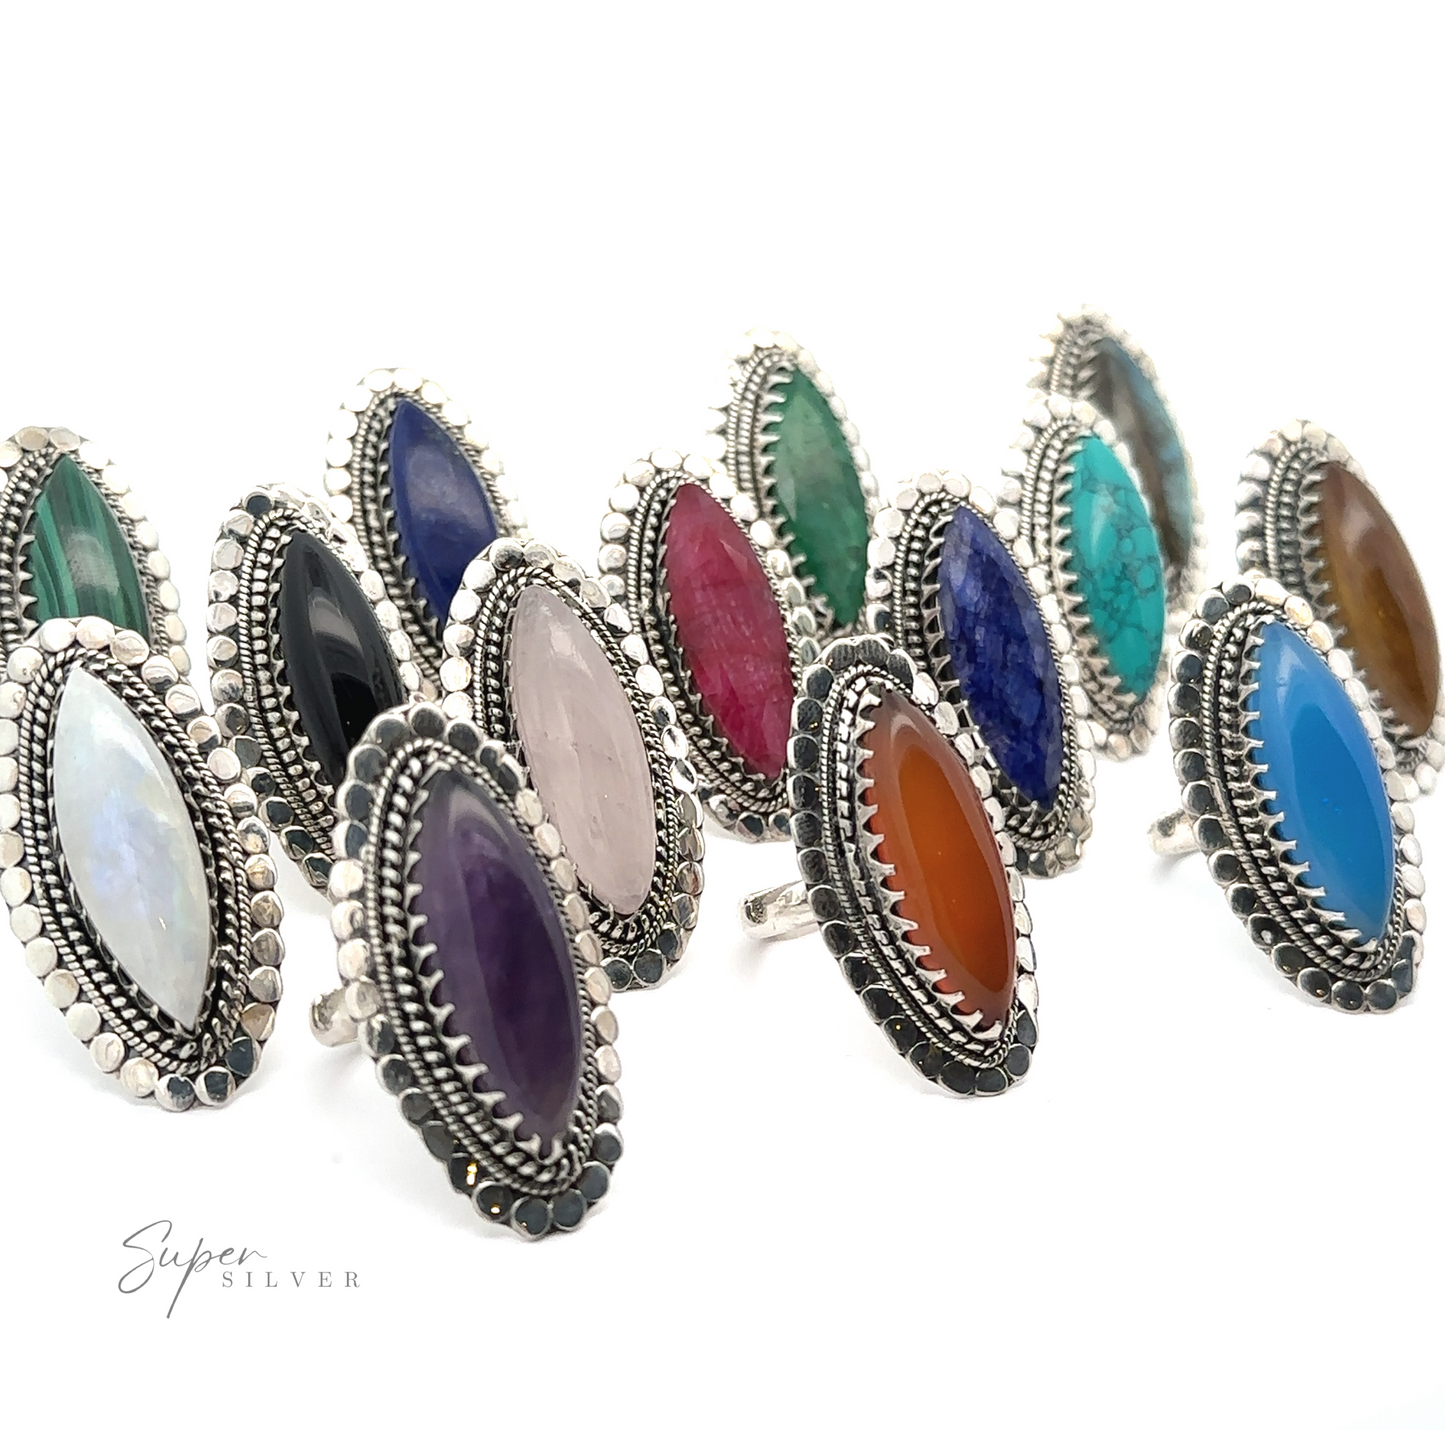 A collection of Statement Marquise Shaped Gemstone Rings with various colored oval gemstones arranged in rows, each piece exuding the charm of Bohemian jewelry.